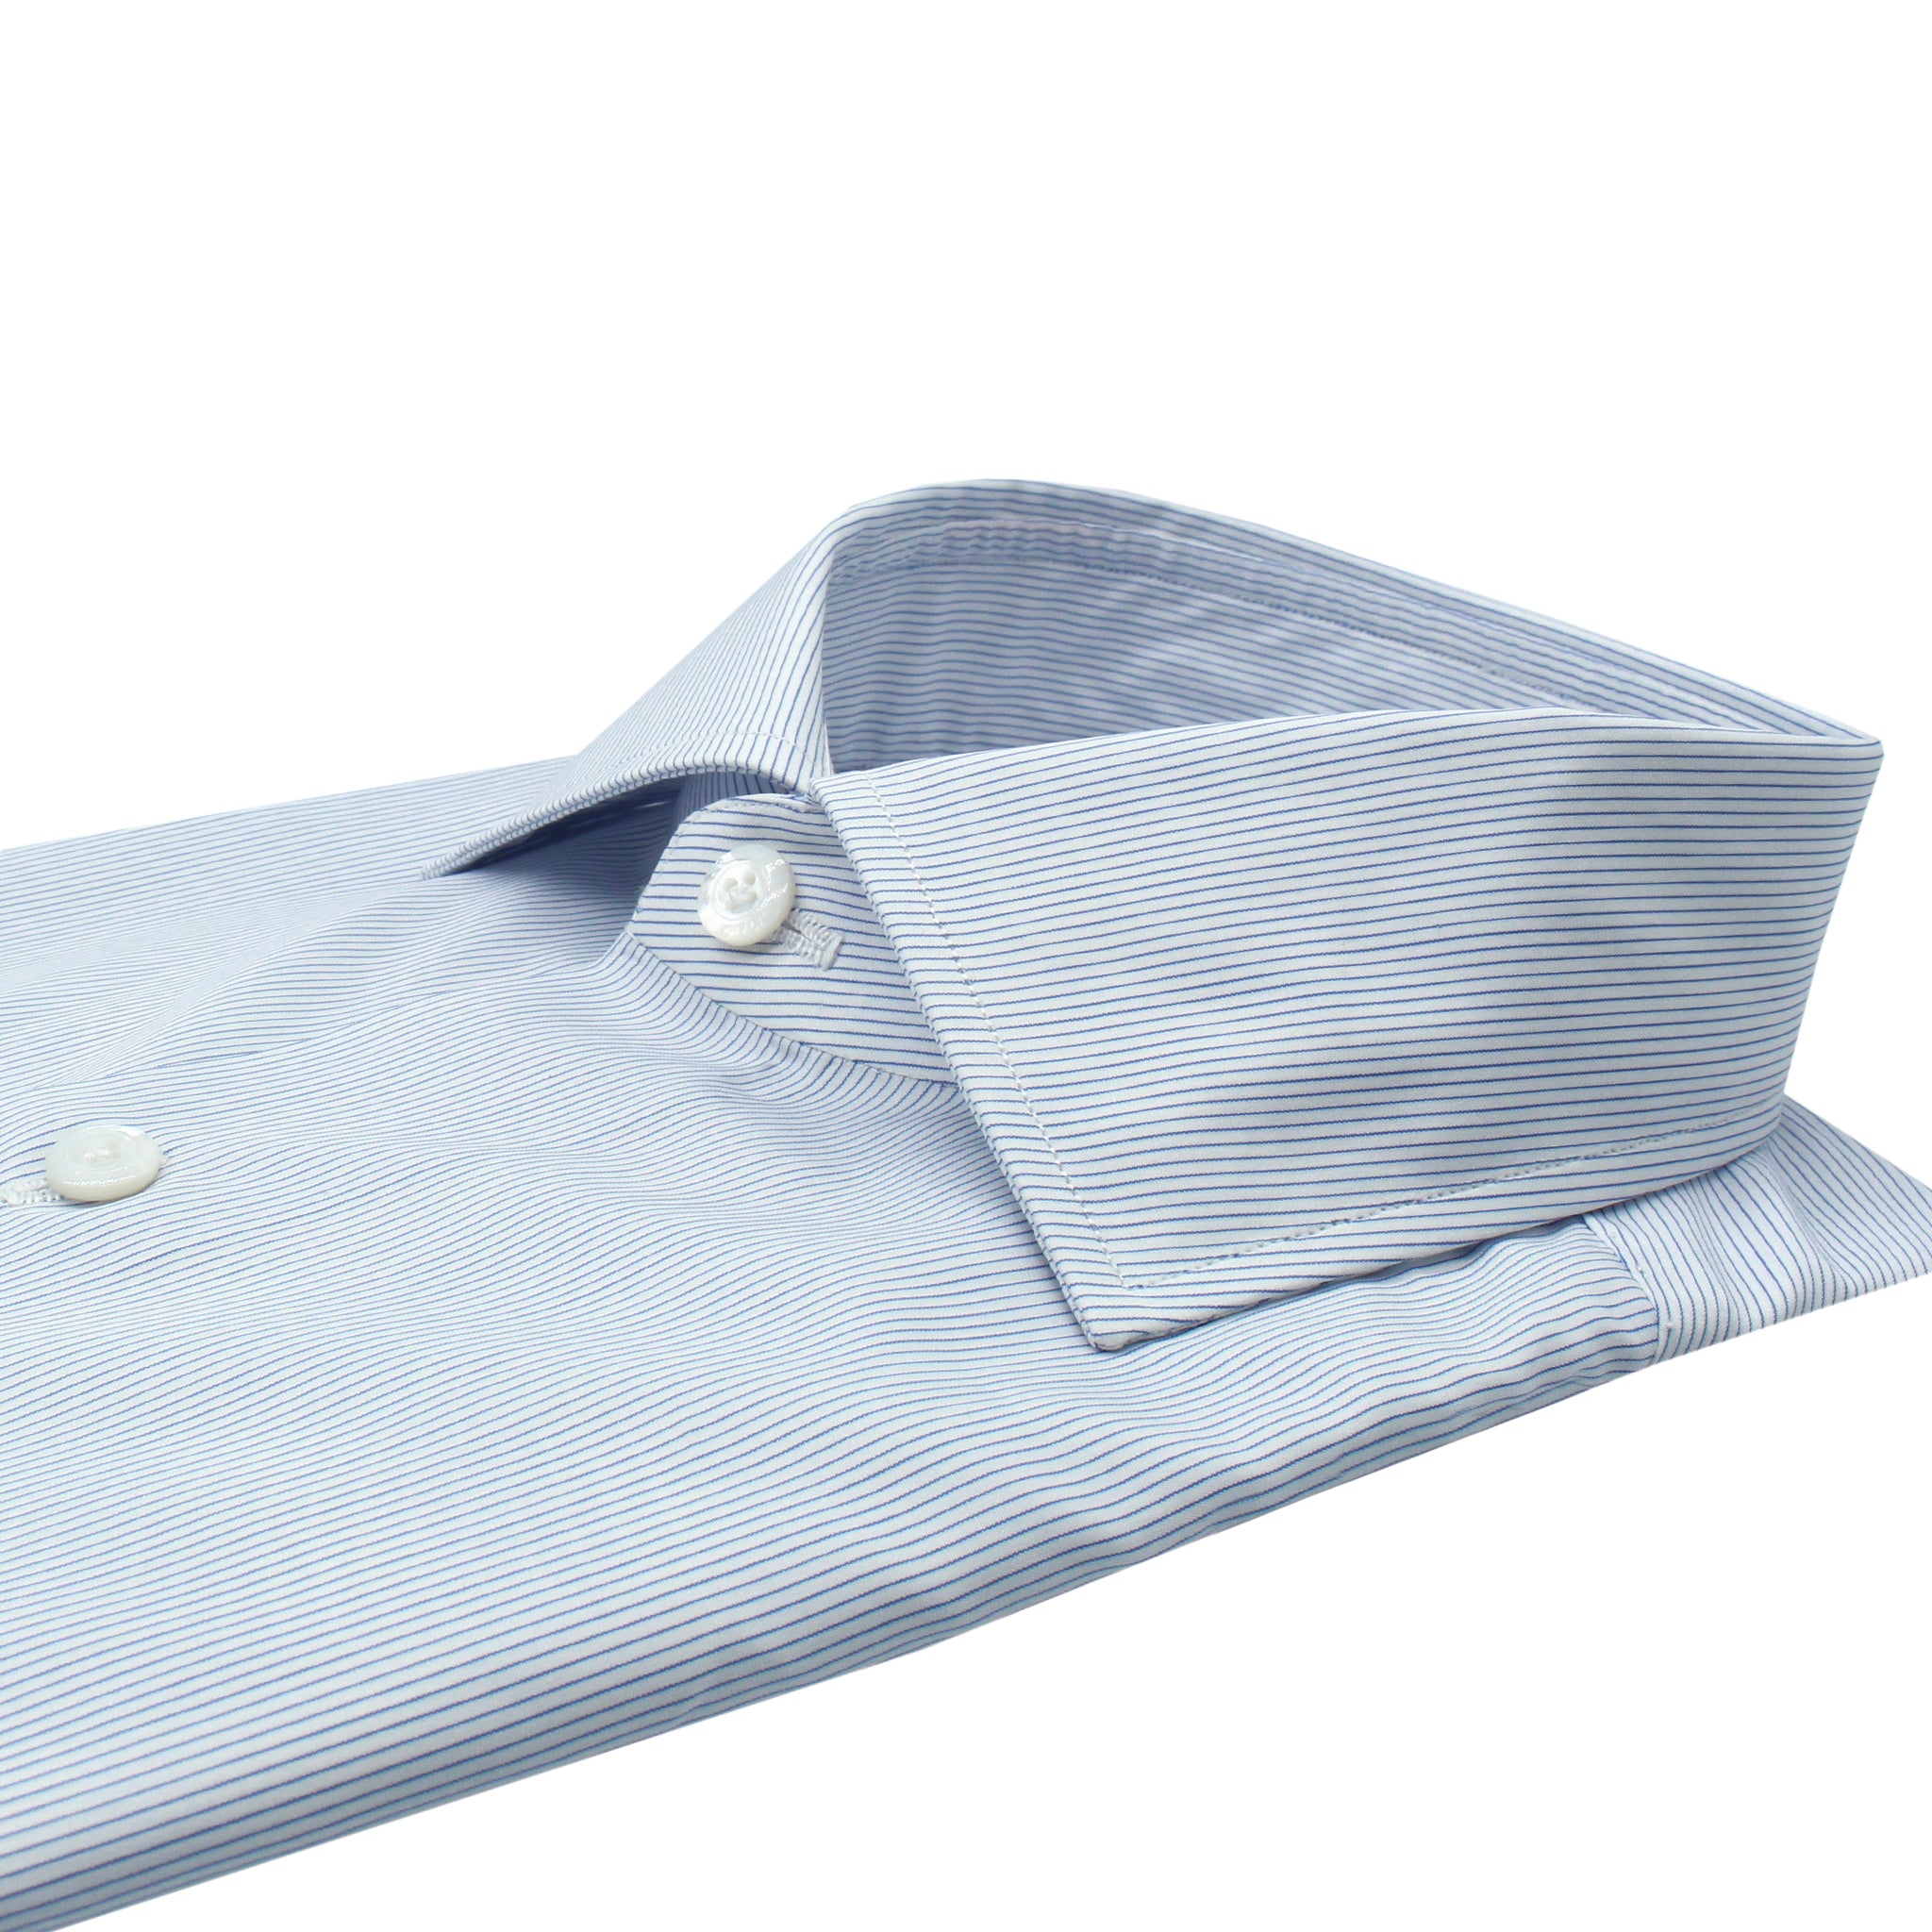 Naples classic fit shirt 170 a due in blue micro striped cotton